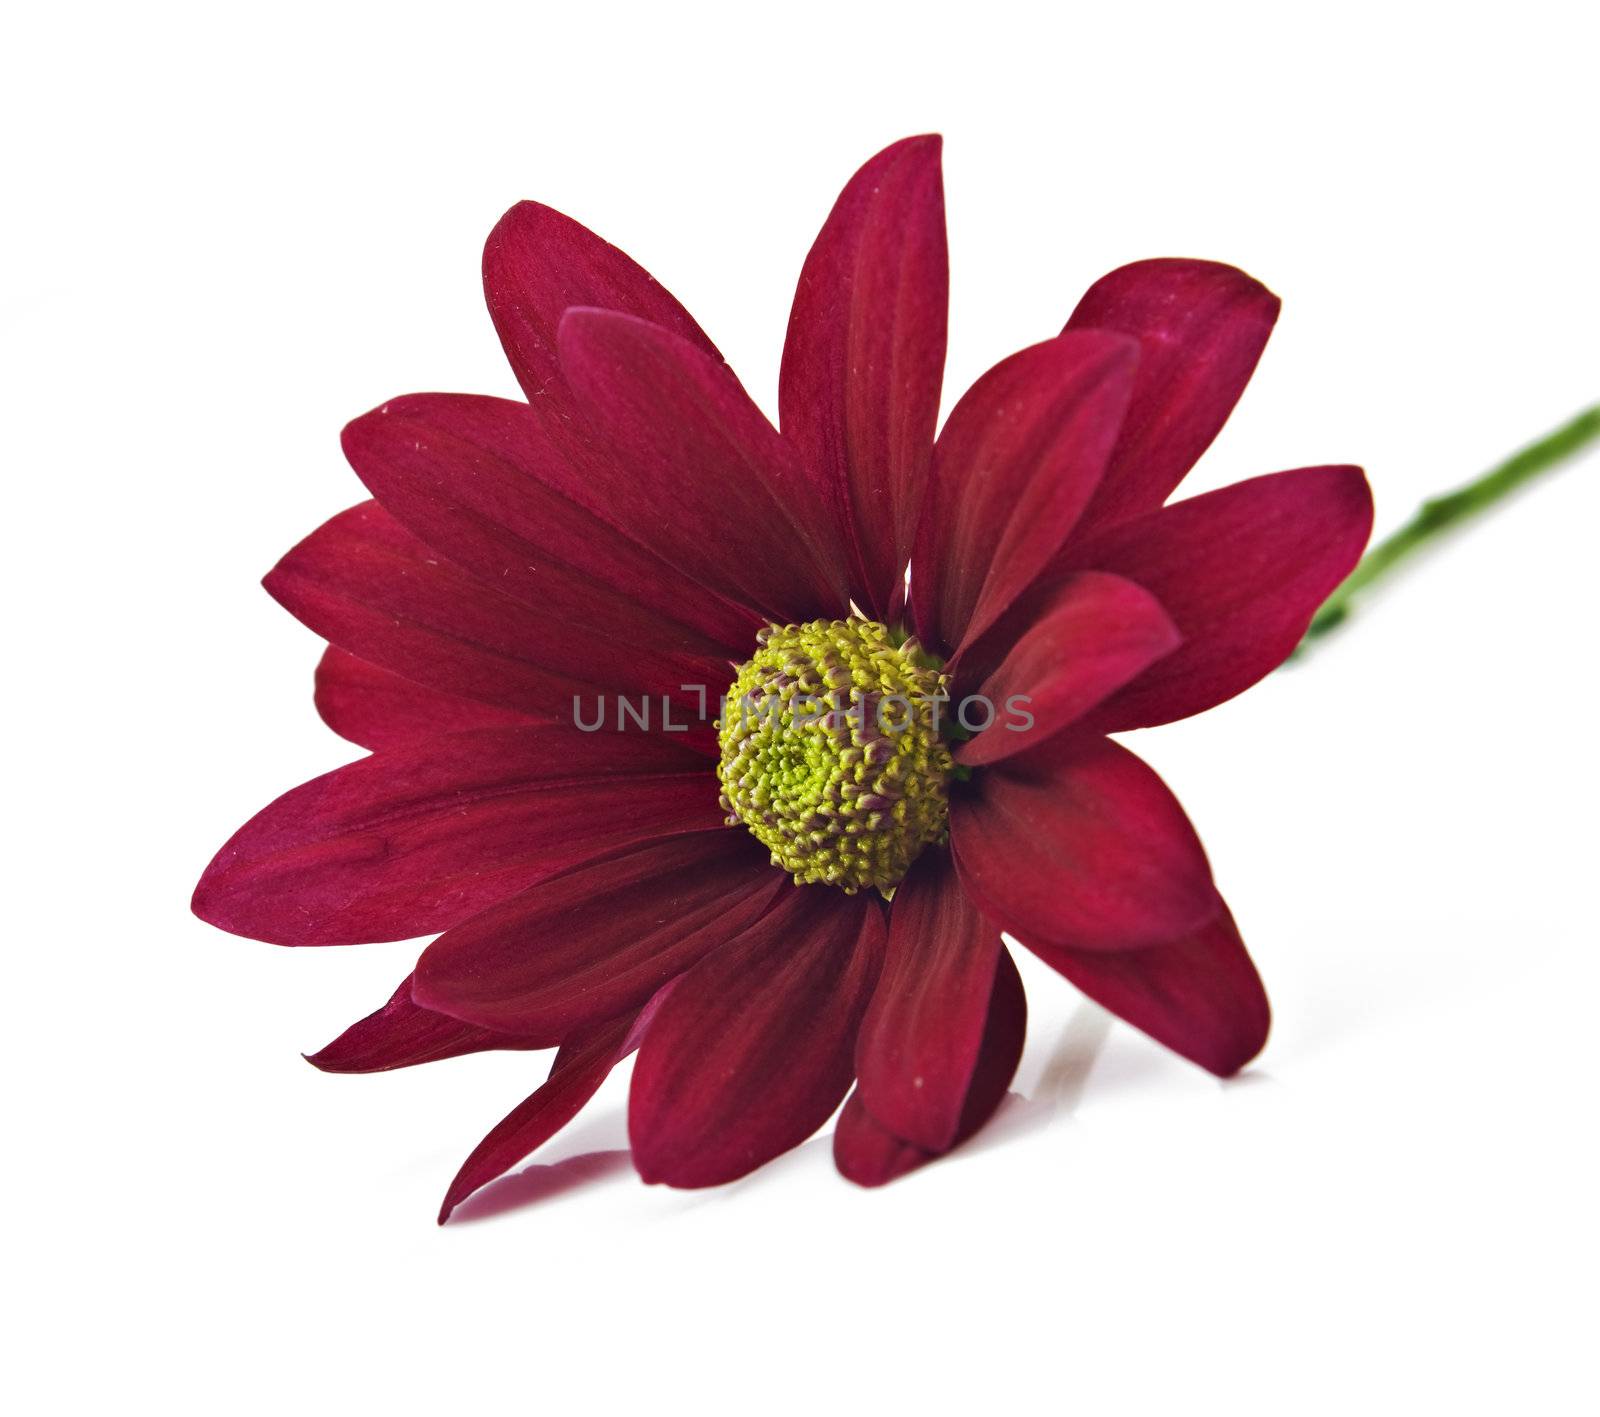 Deep red chrysanthemum flower on a pure white background with space for text by tish1